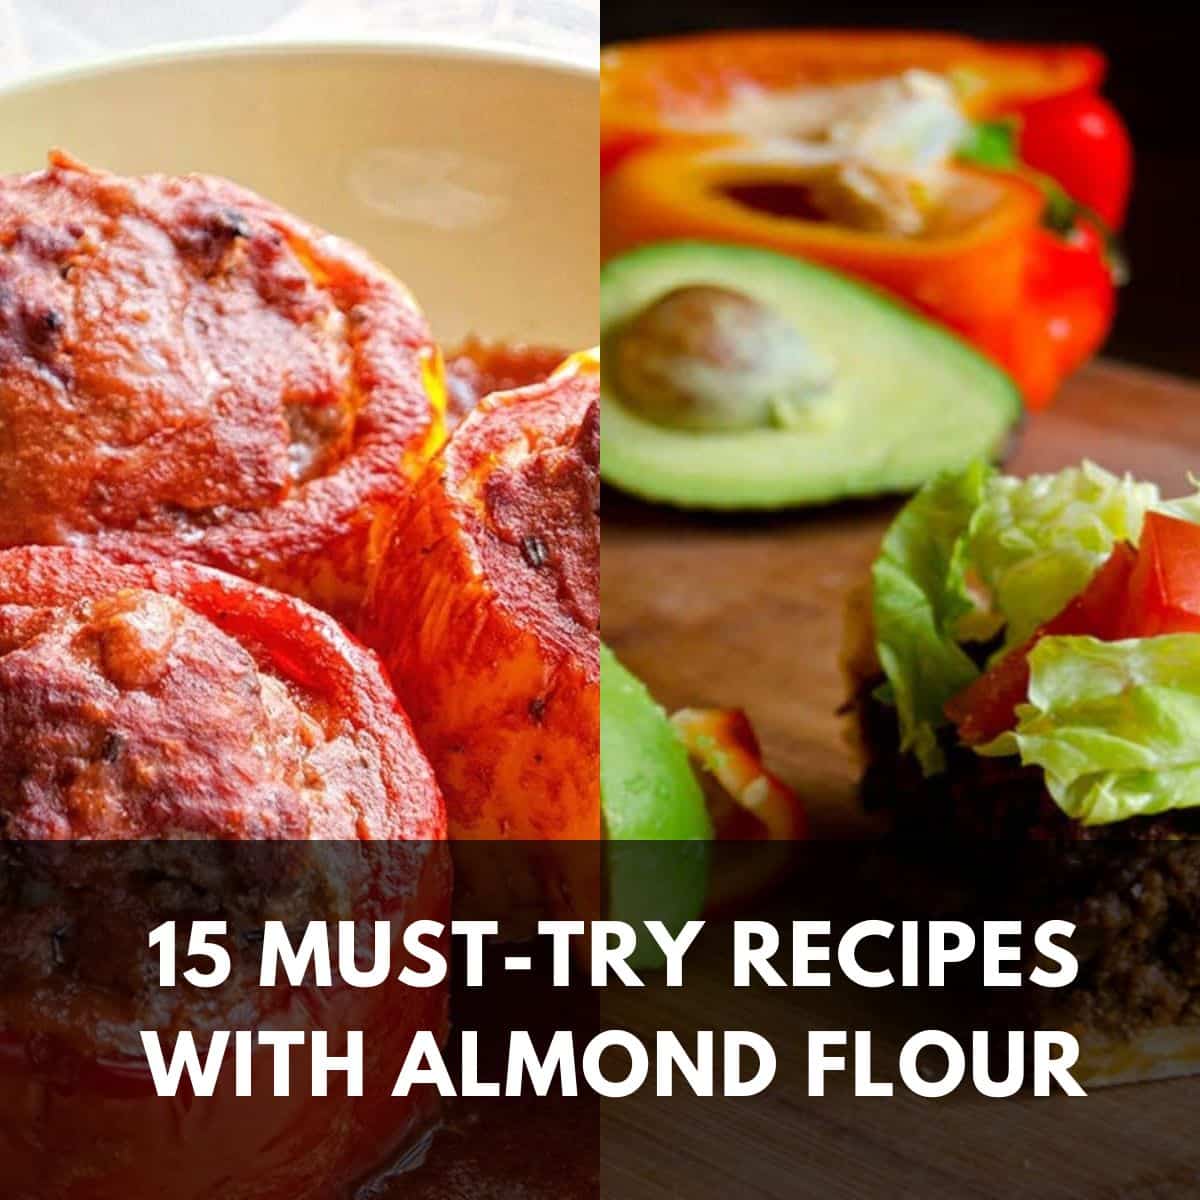 15 Must-Try Recipes With Almond Flour